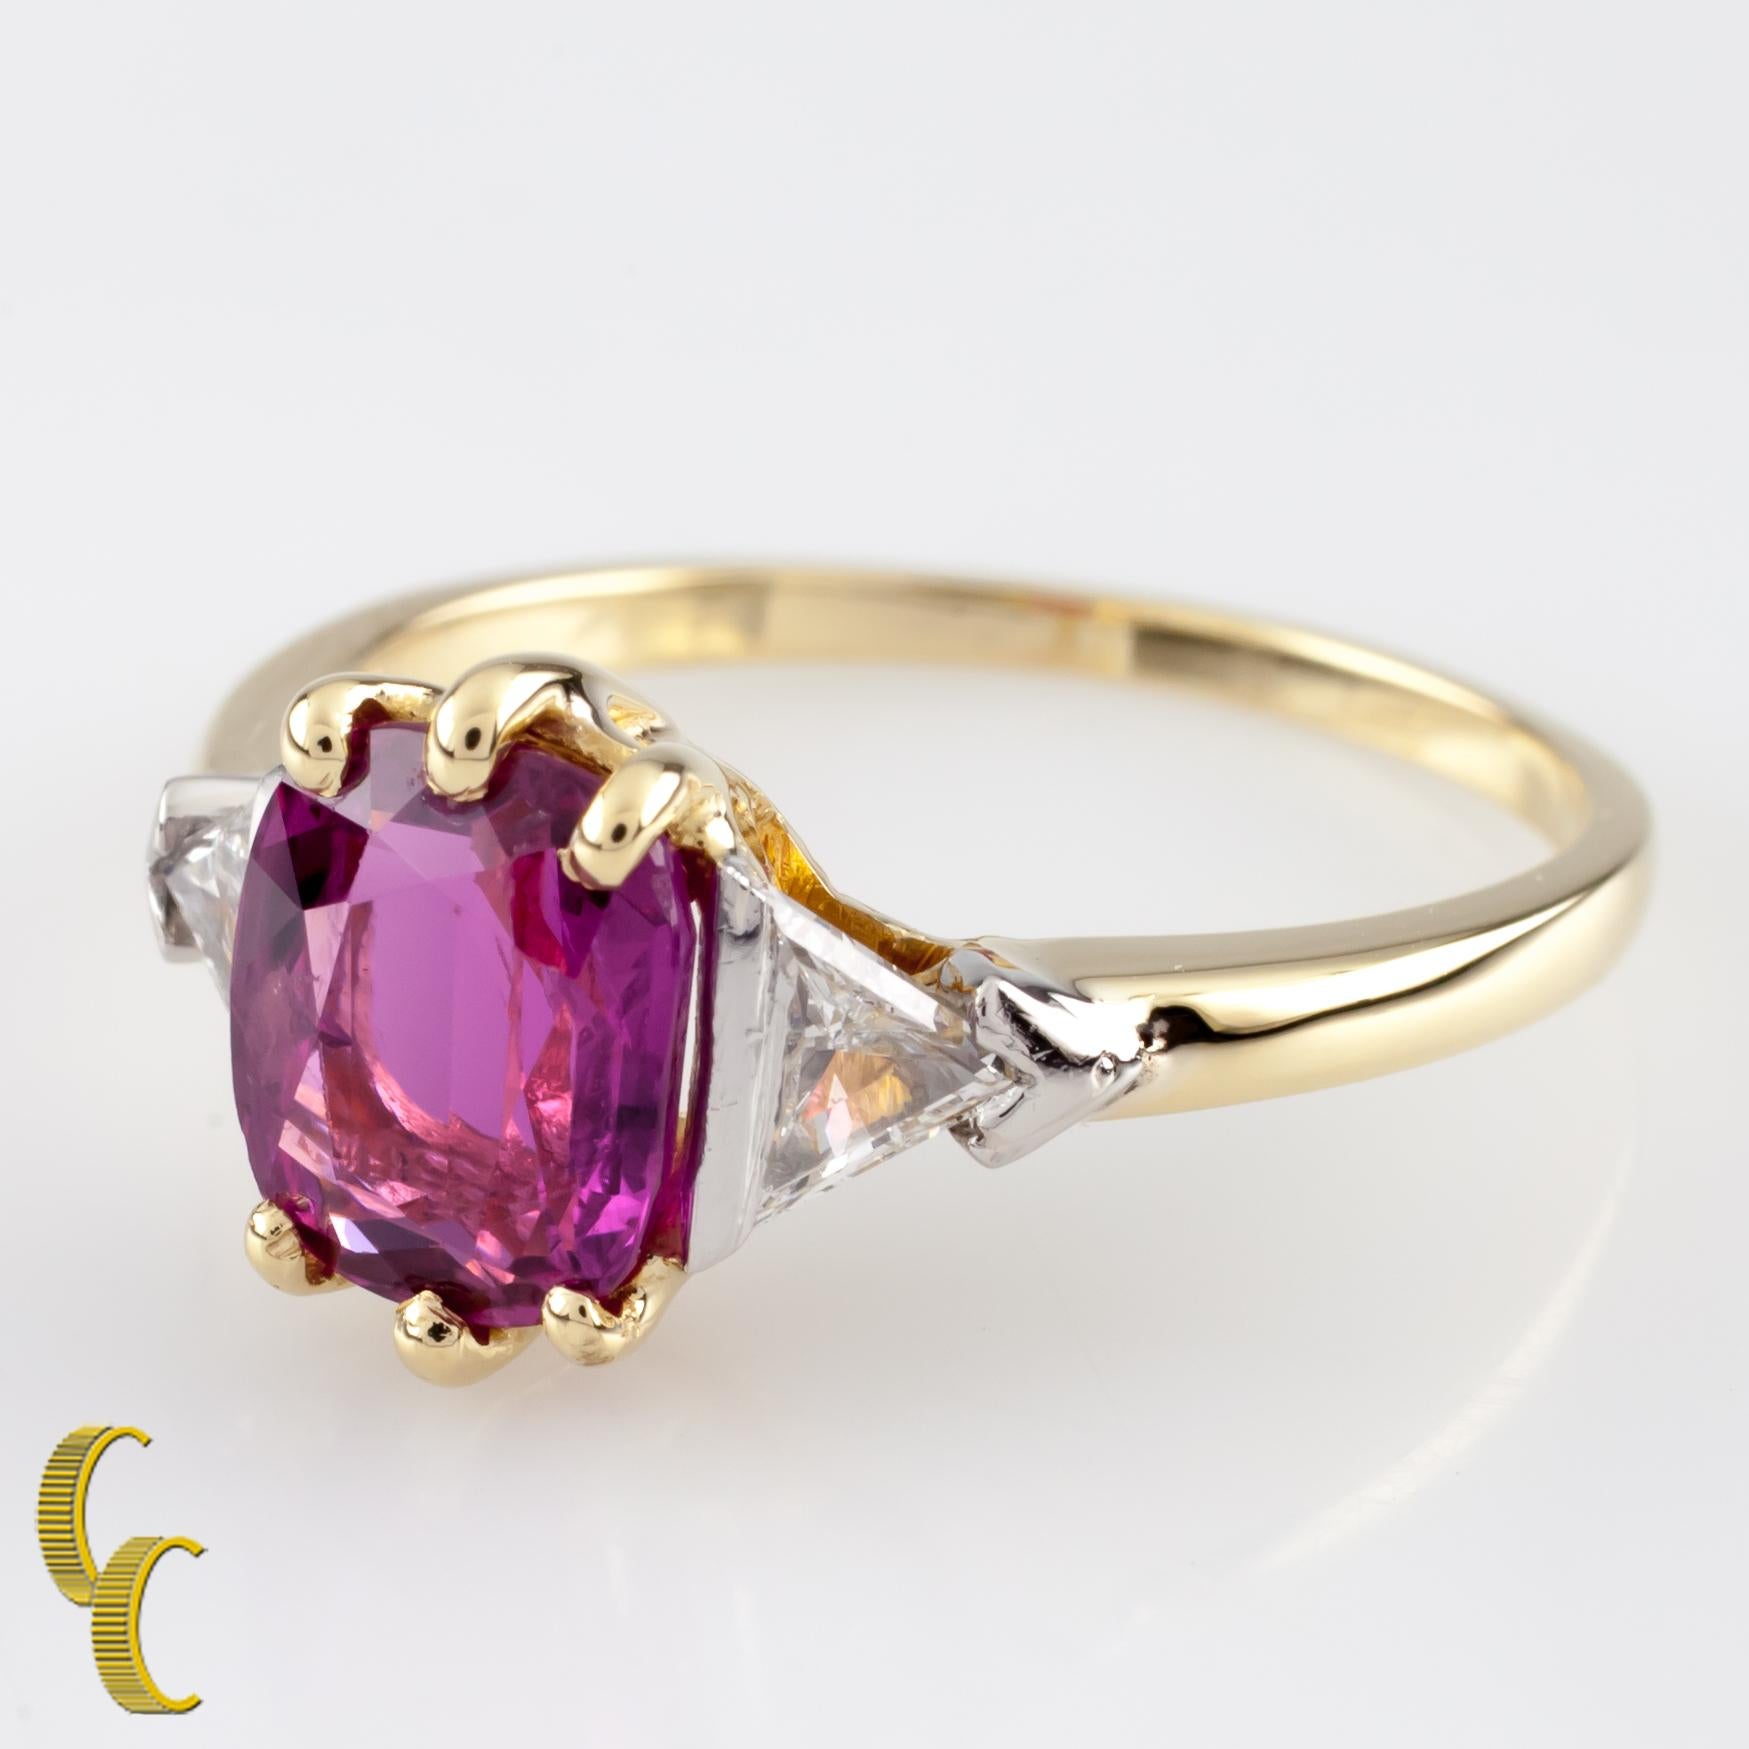 Beautiful Three-Stone 18k Yellow Gold Ring
Features Prong-Set 1.50 carat Natural Ruby Center Stone 
Two 0.15 carats Trillion (Triangle shaped) Diamond Accent Stones
Total Diamond weight: 0.30 carats
Ring size 7.25
Total mass - 4.2 grams